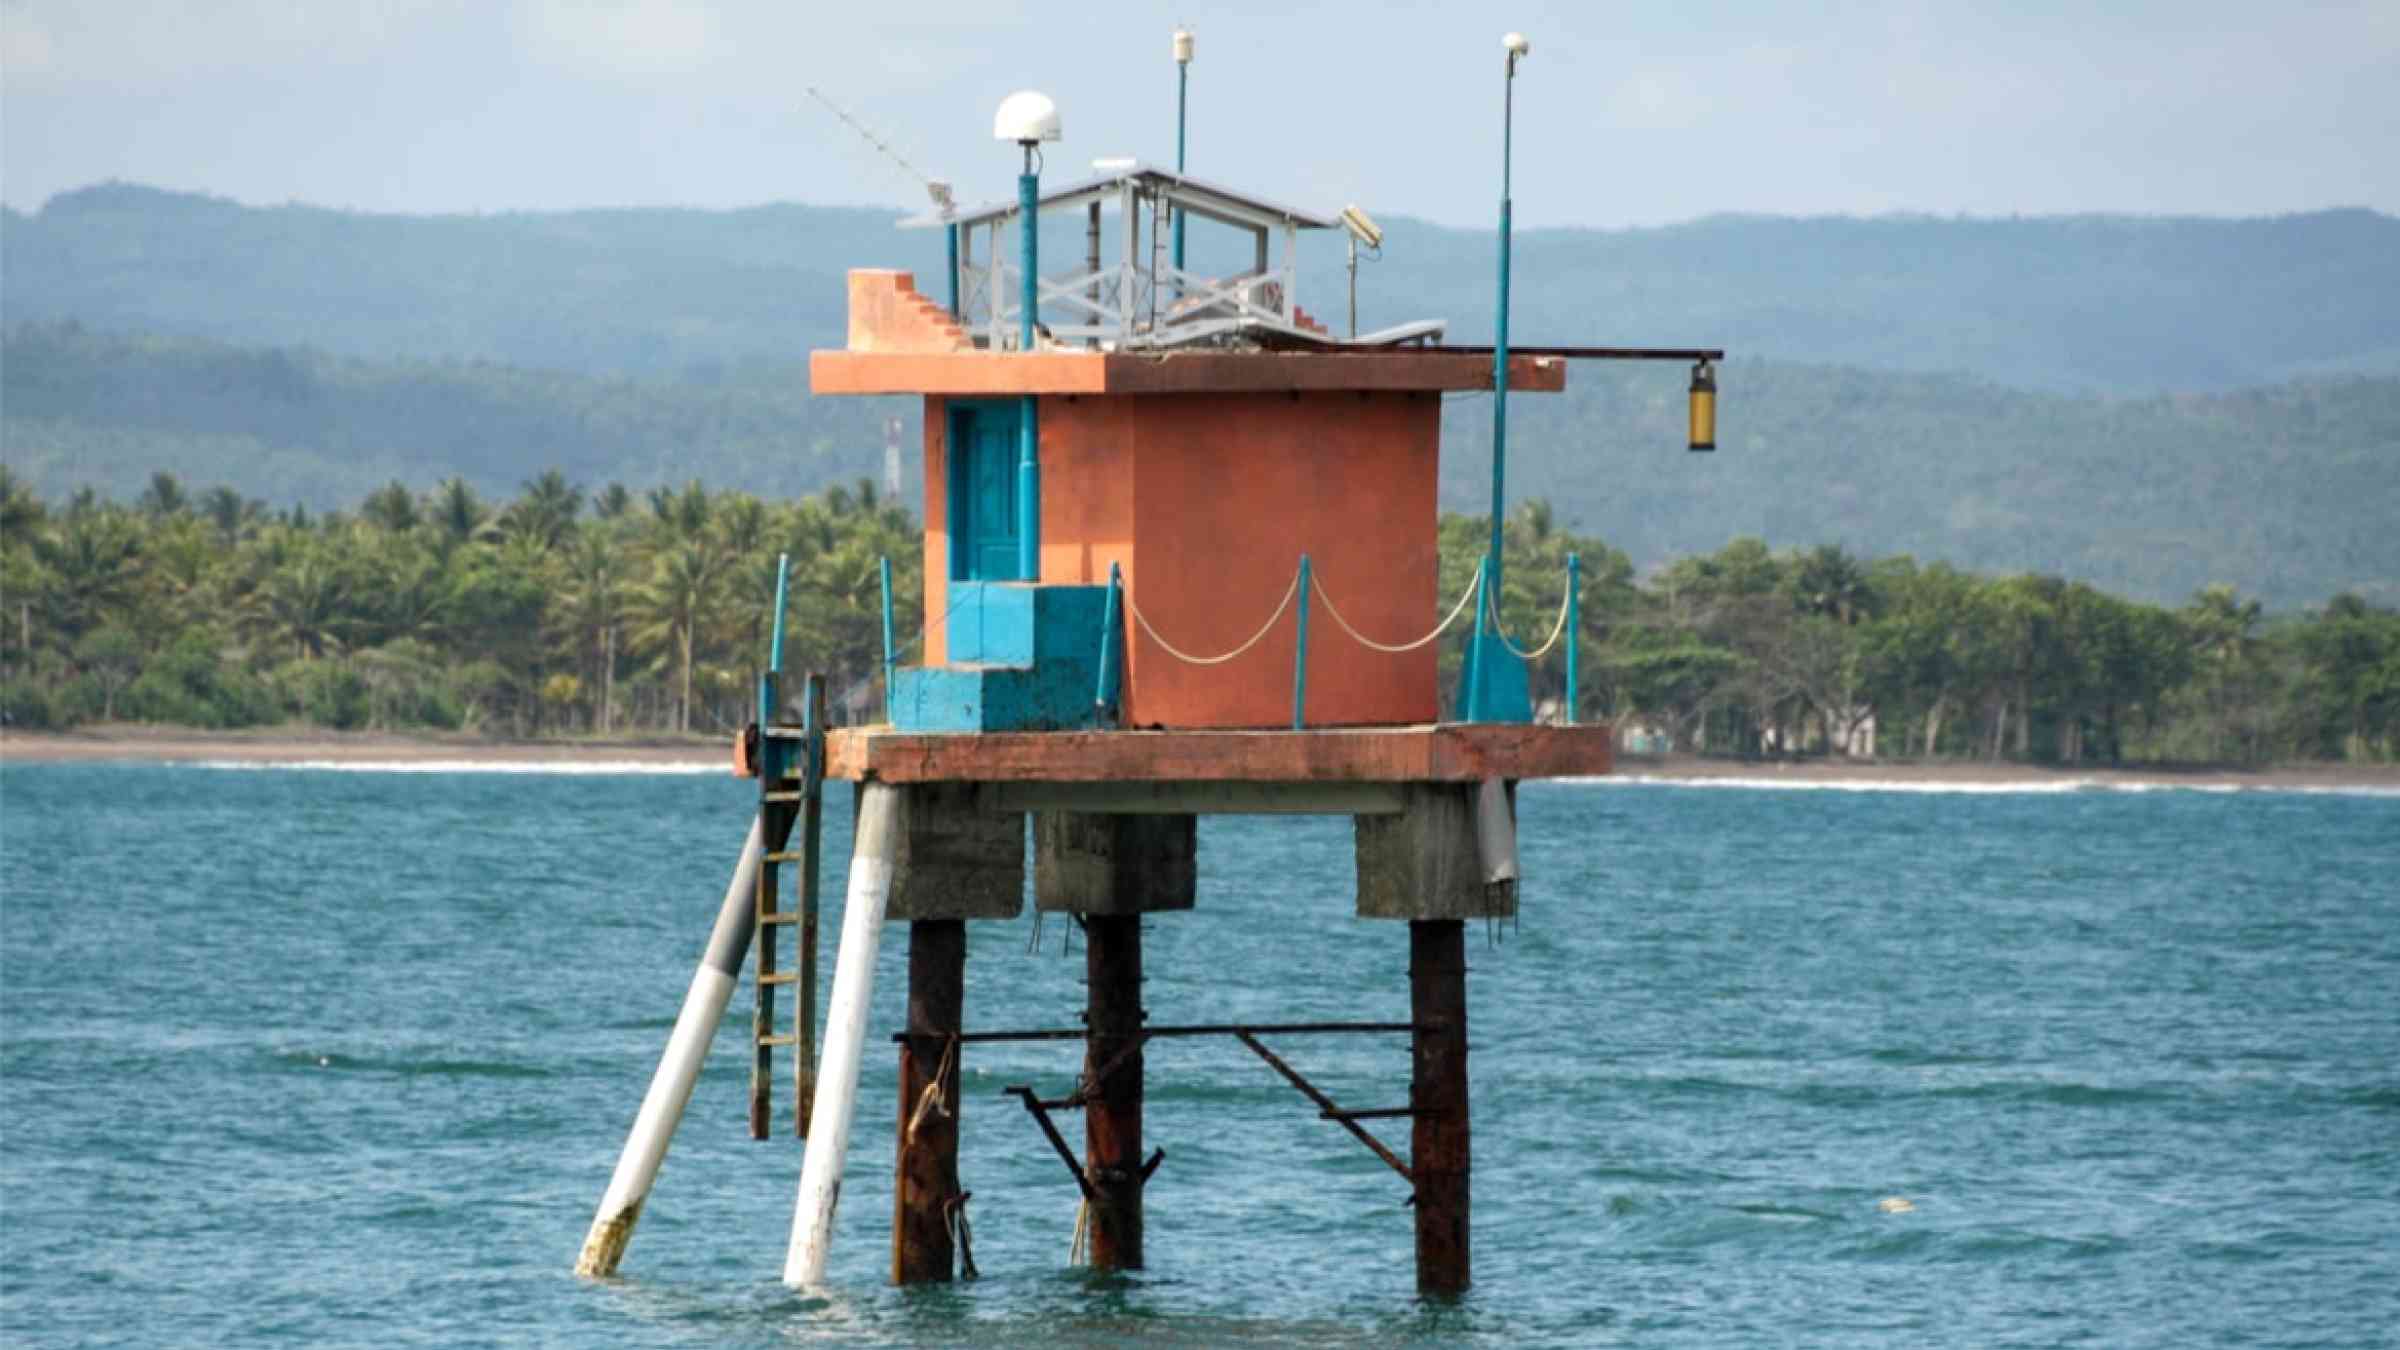 Tsunami early warning system in the sea